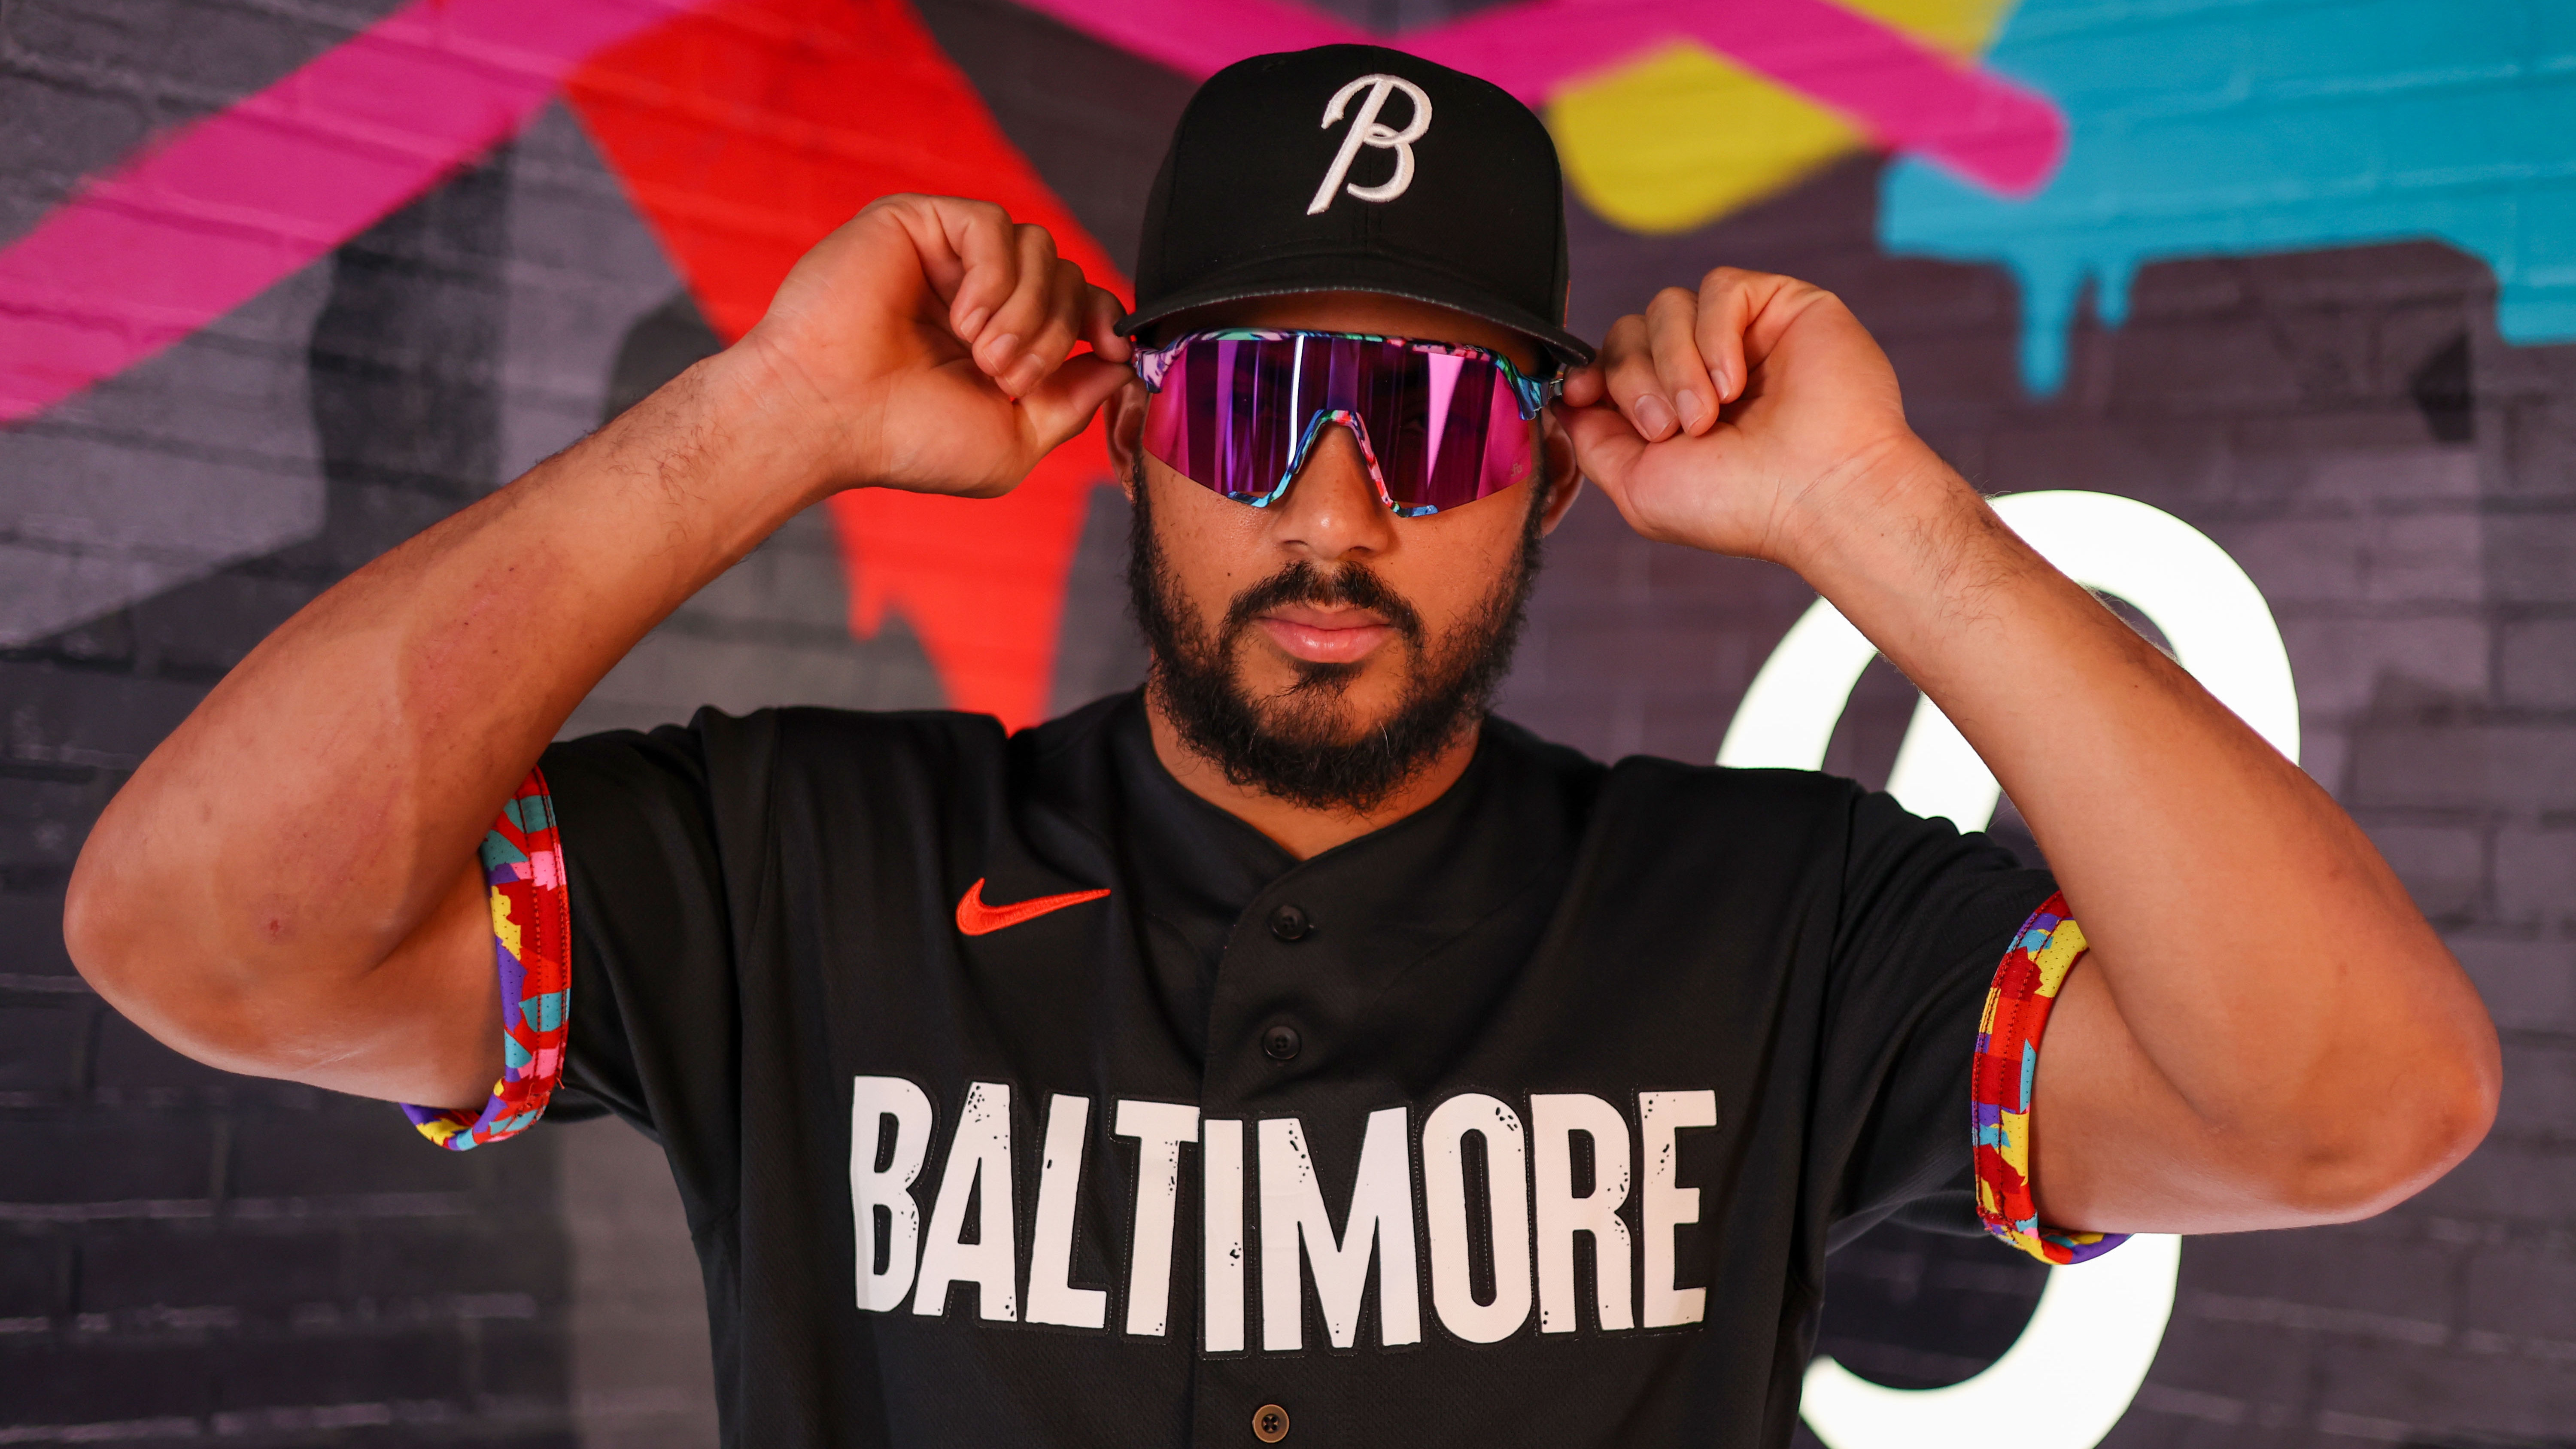 Orioles unveil City Connect uniforms, with colorful interior reflecting Baltimore's neighborhoods